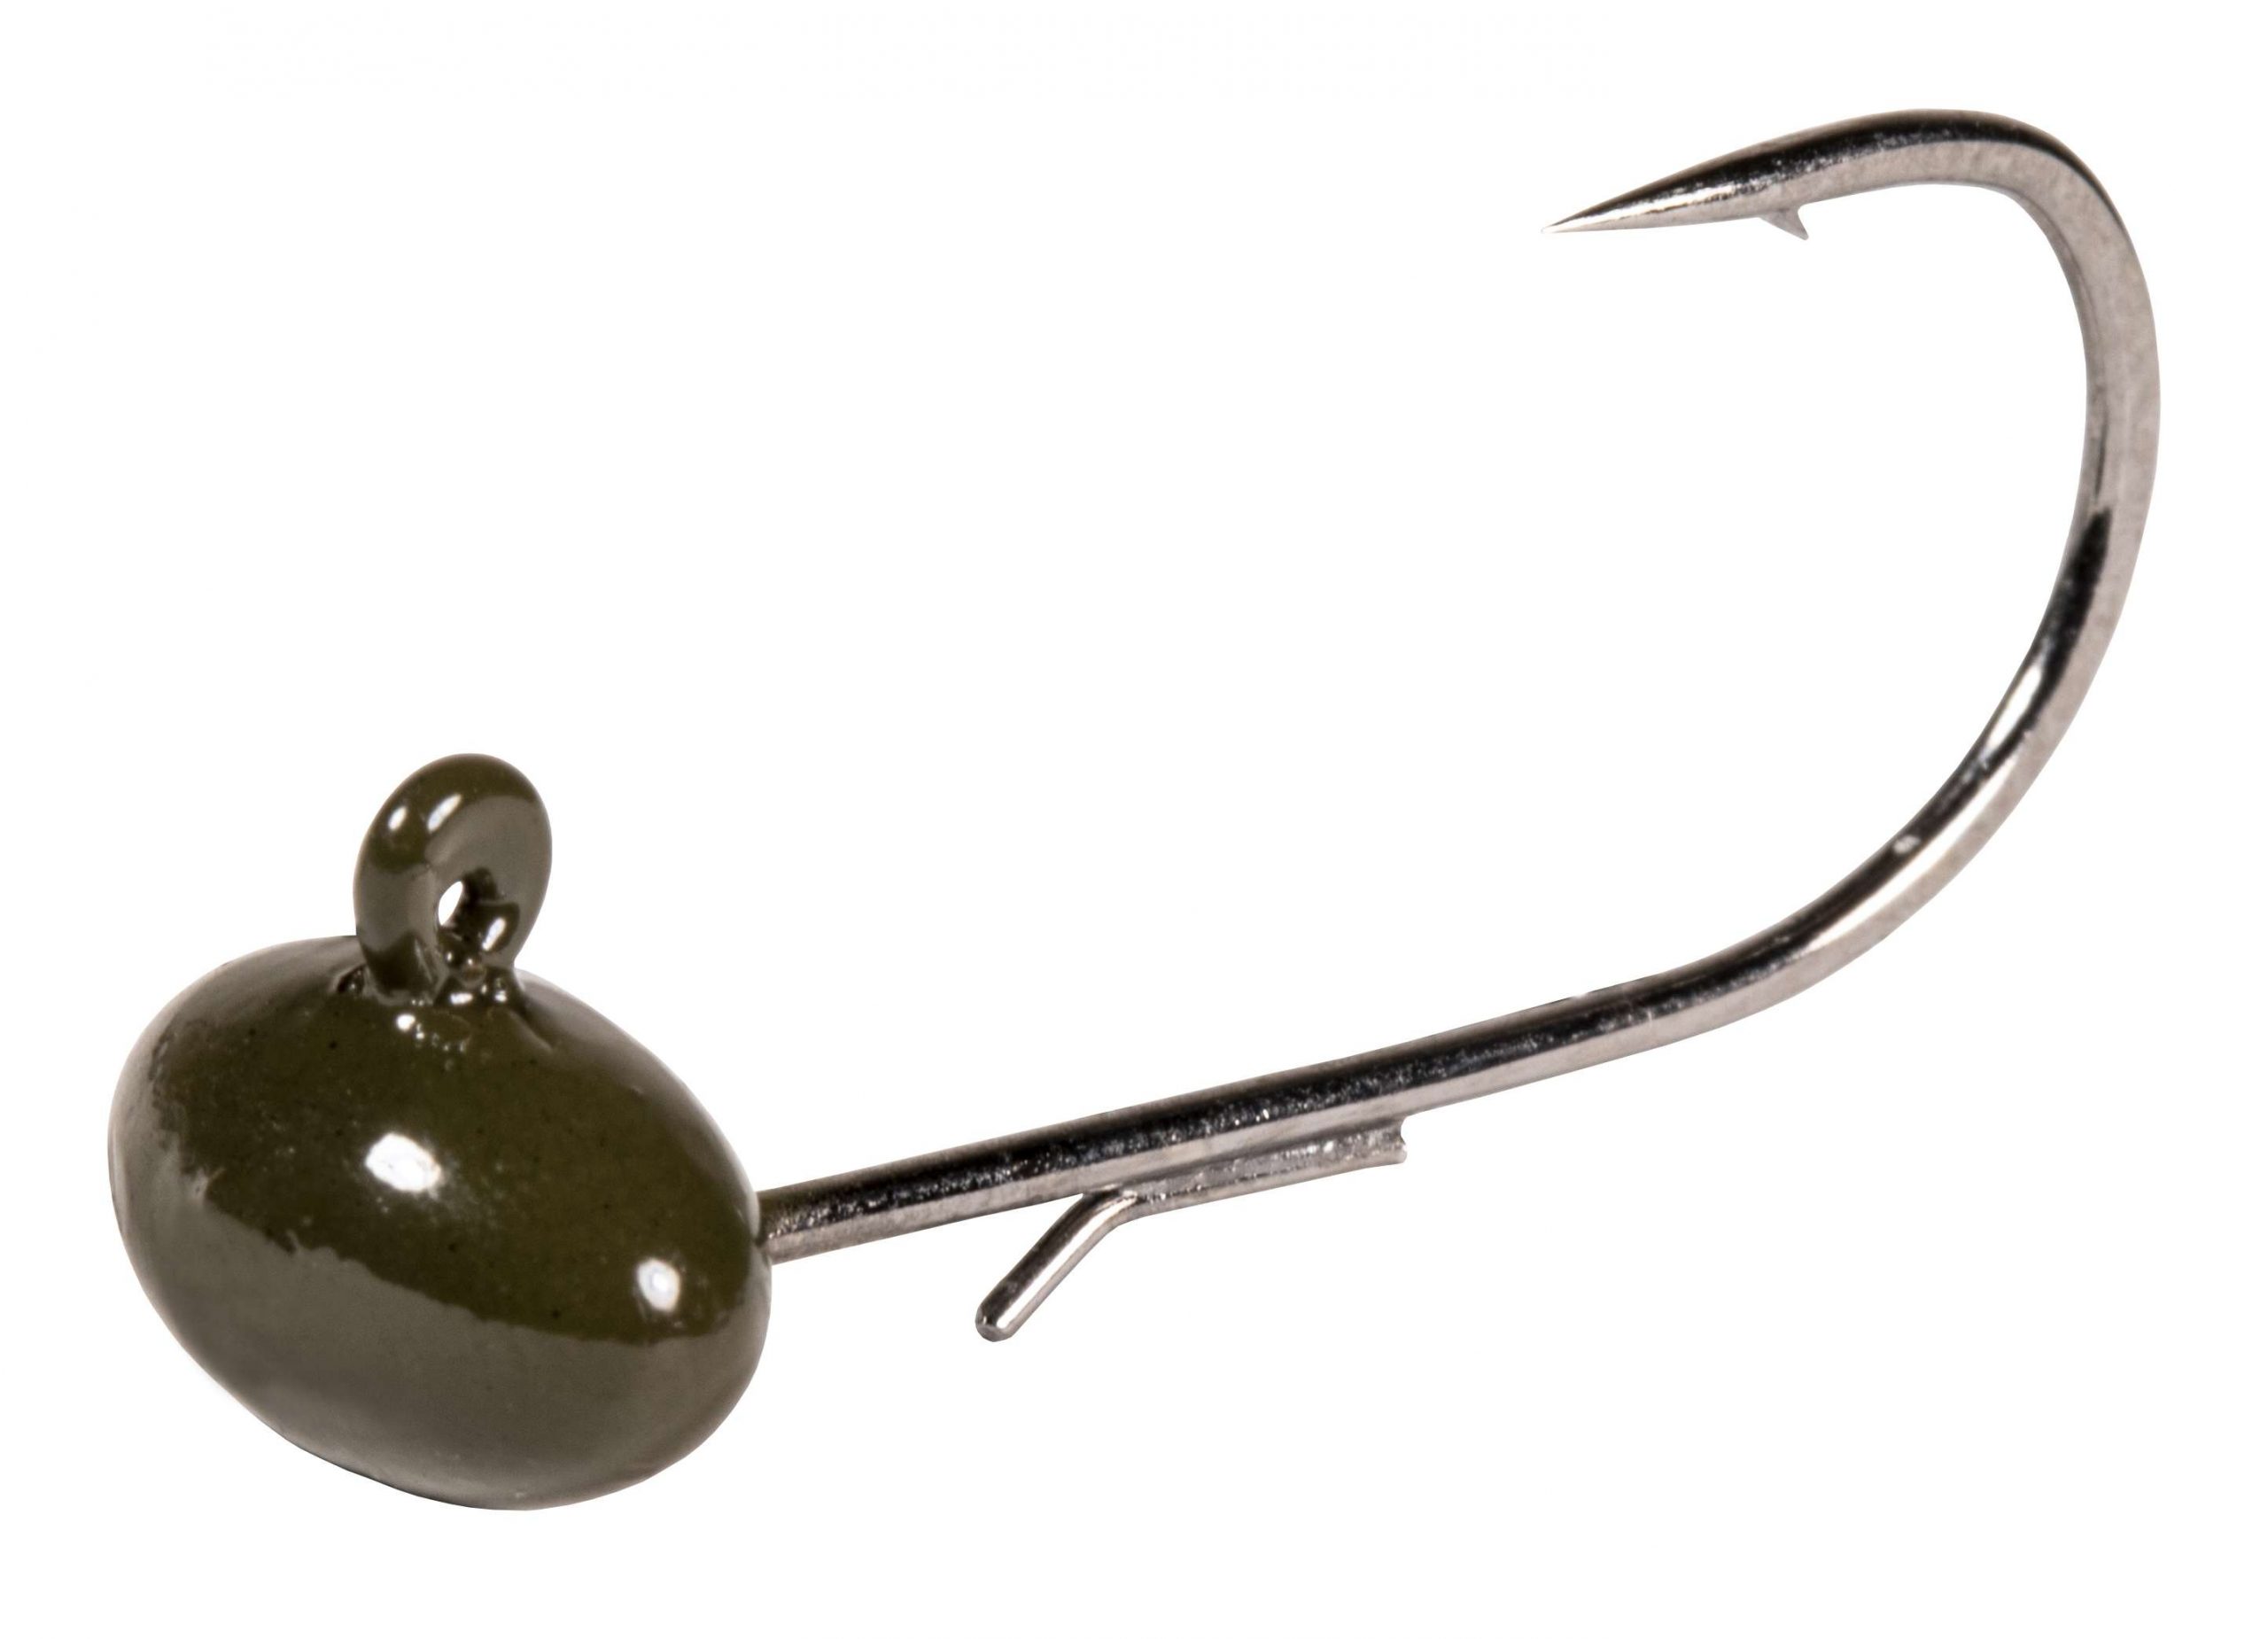 Built on a downsized football jig framework and 1/0 black nickel hook, the Z-Man Football NedZ Jighead crawls cleanly across the rocks, using its rounded crown to swivel and rocks its finesse bait trailer like itâs headbangerâs ball. 